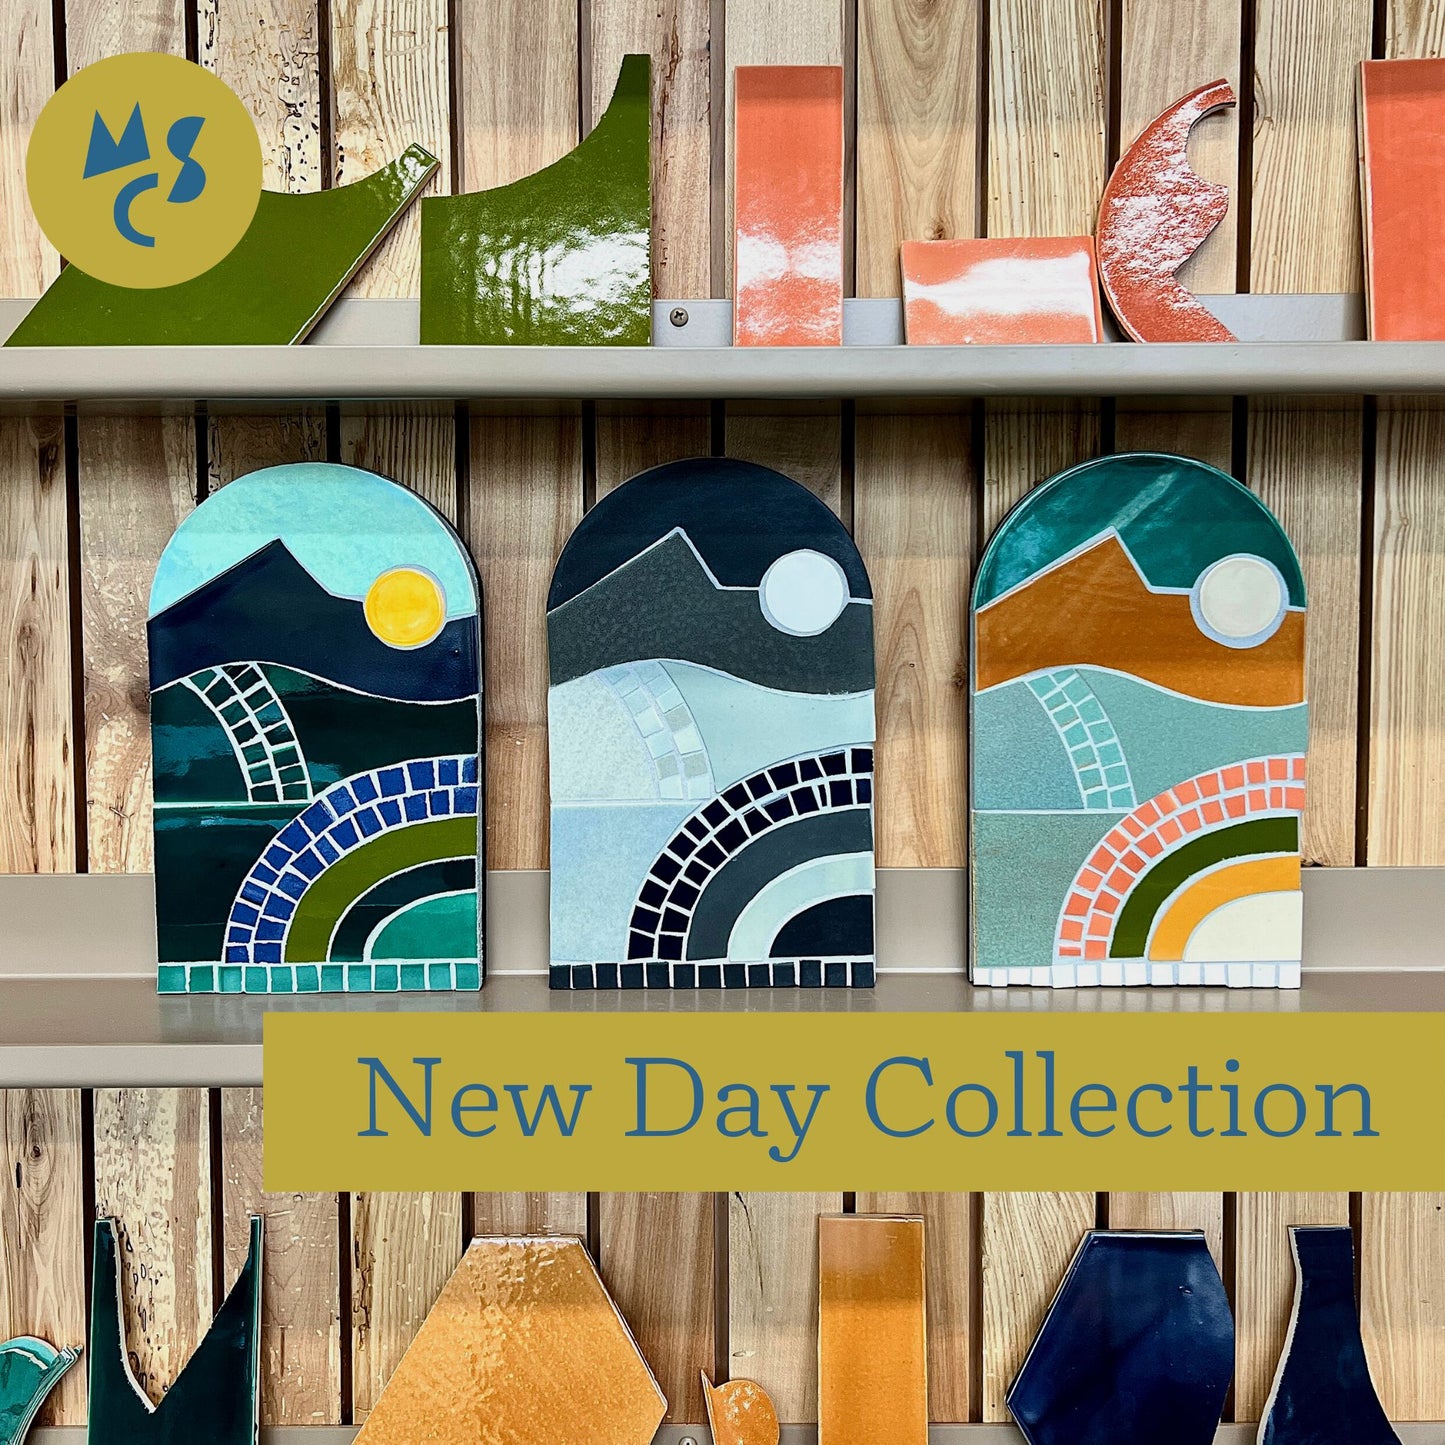 New Day - Mosaic Collection with upcycled tiles on open shelving